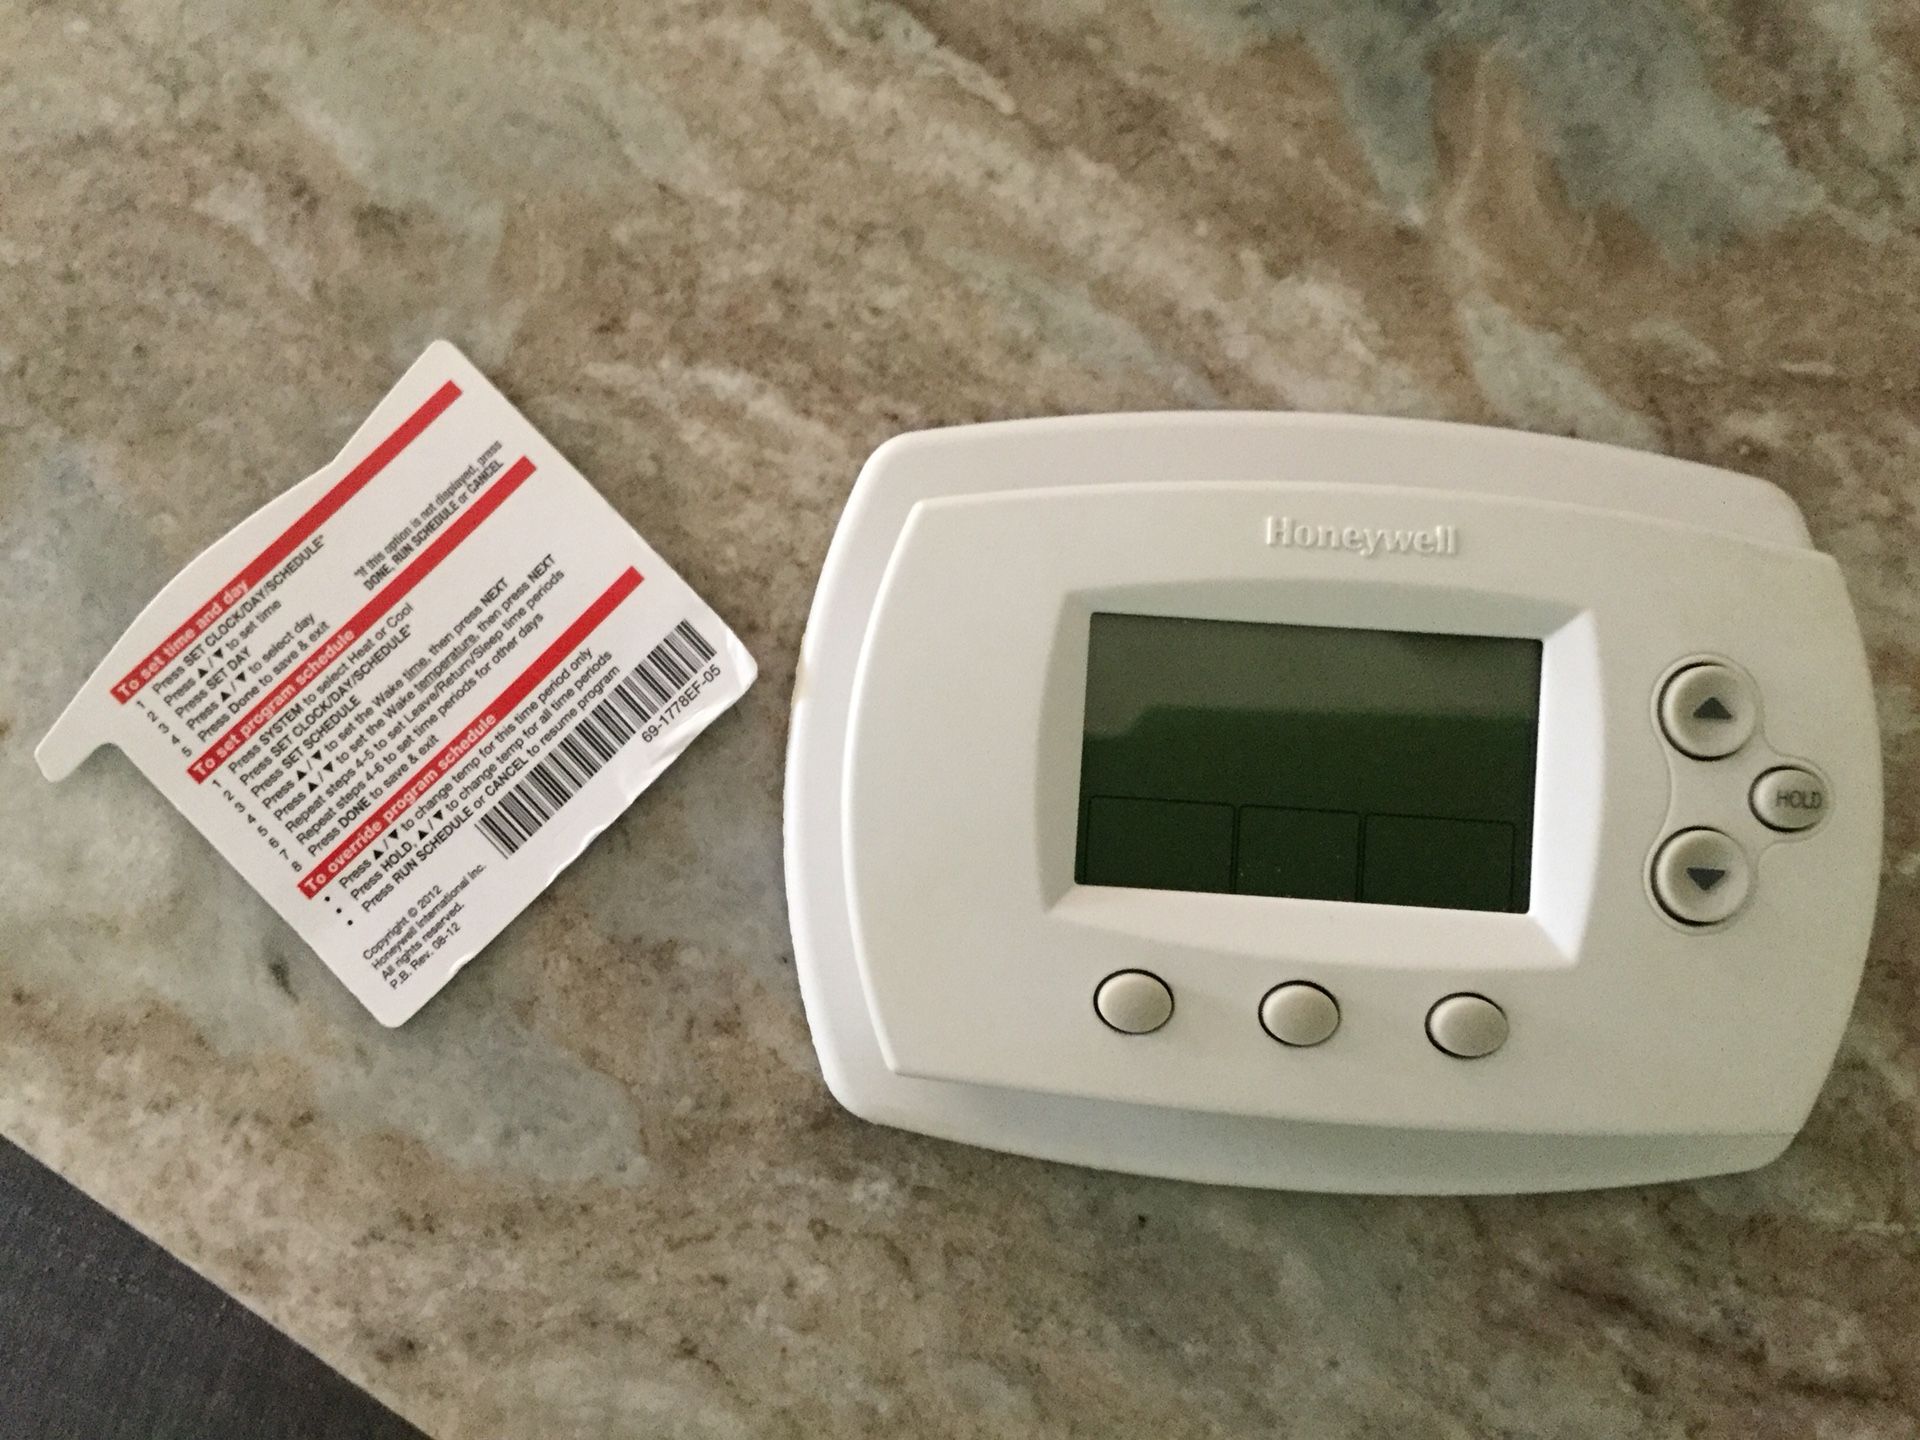 Honeywell 7-day programmable Thermostat